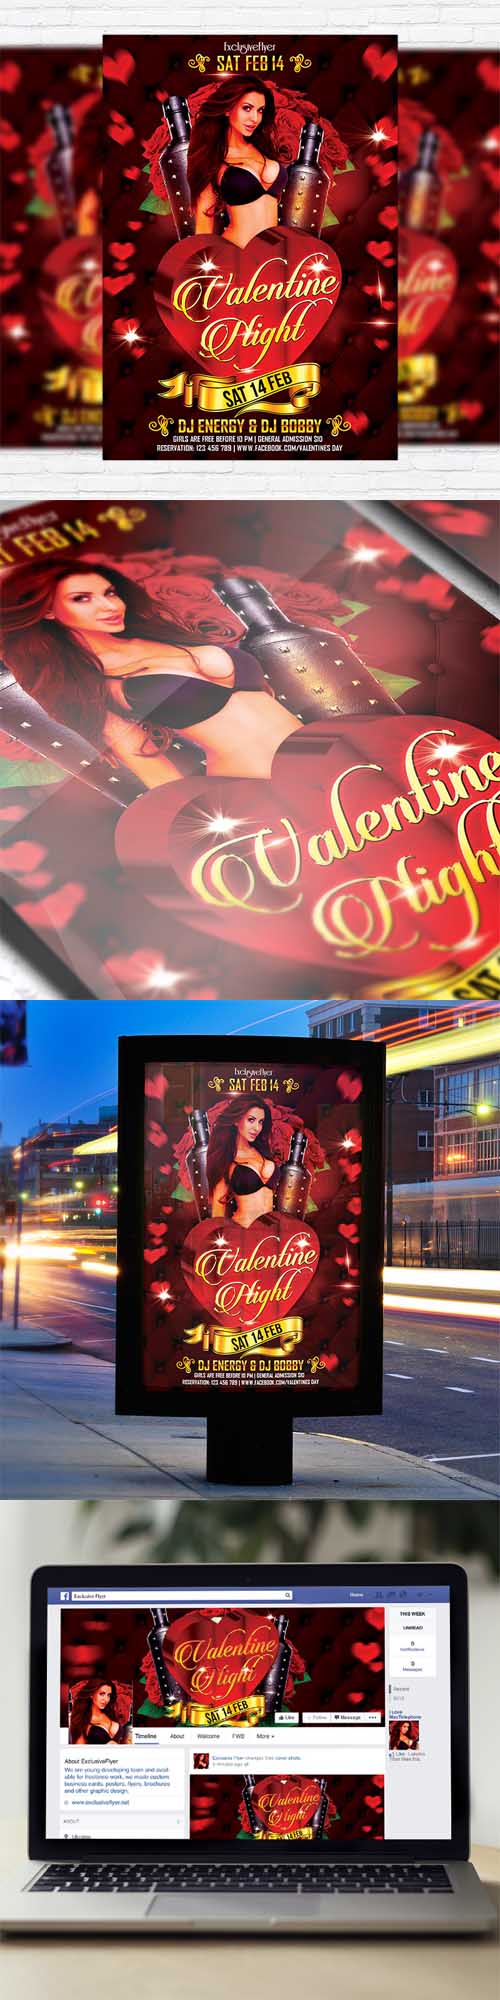 Flyer Template - Valentines Night Party + Facebook Cover